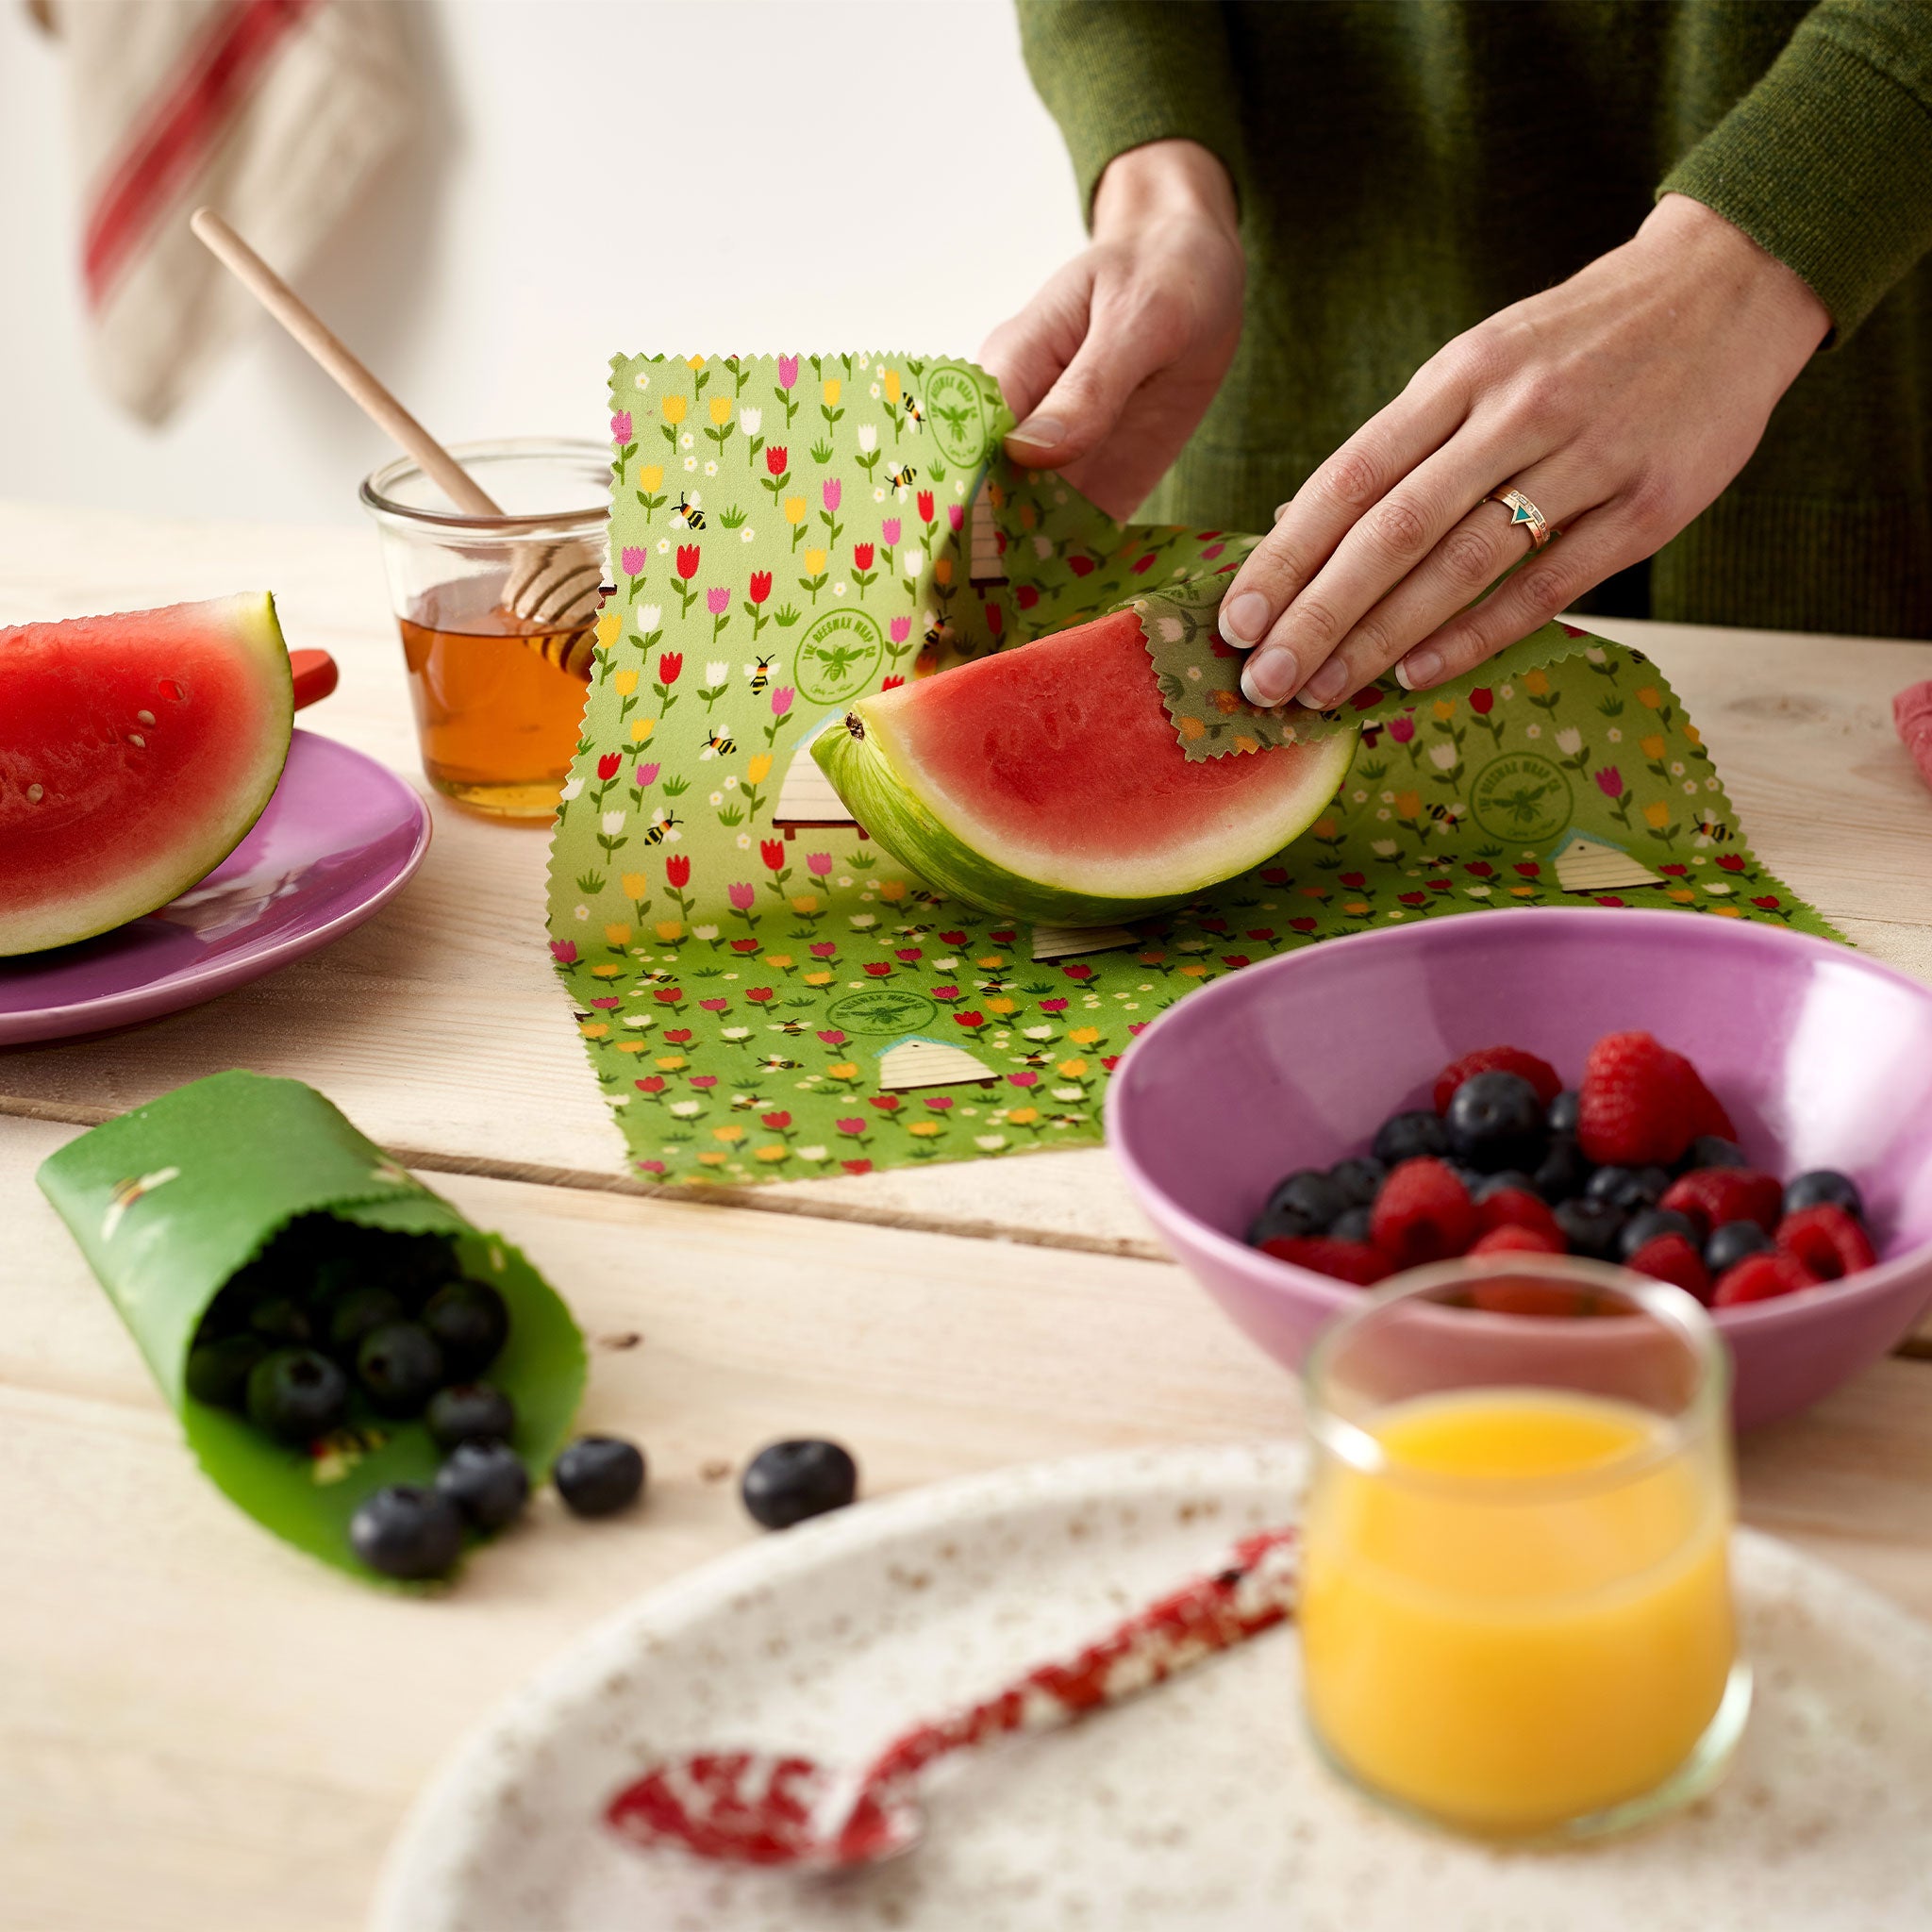 Lifestyle image of a woman wrapping a piece of watermelon up in a Beeswax wrap.